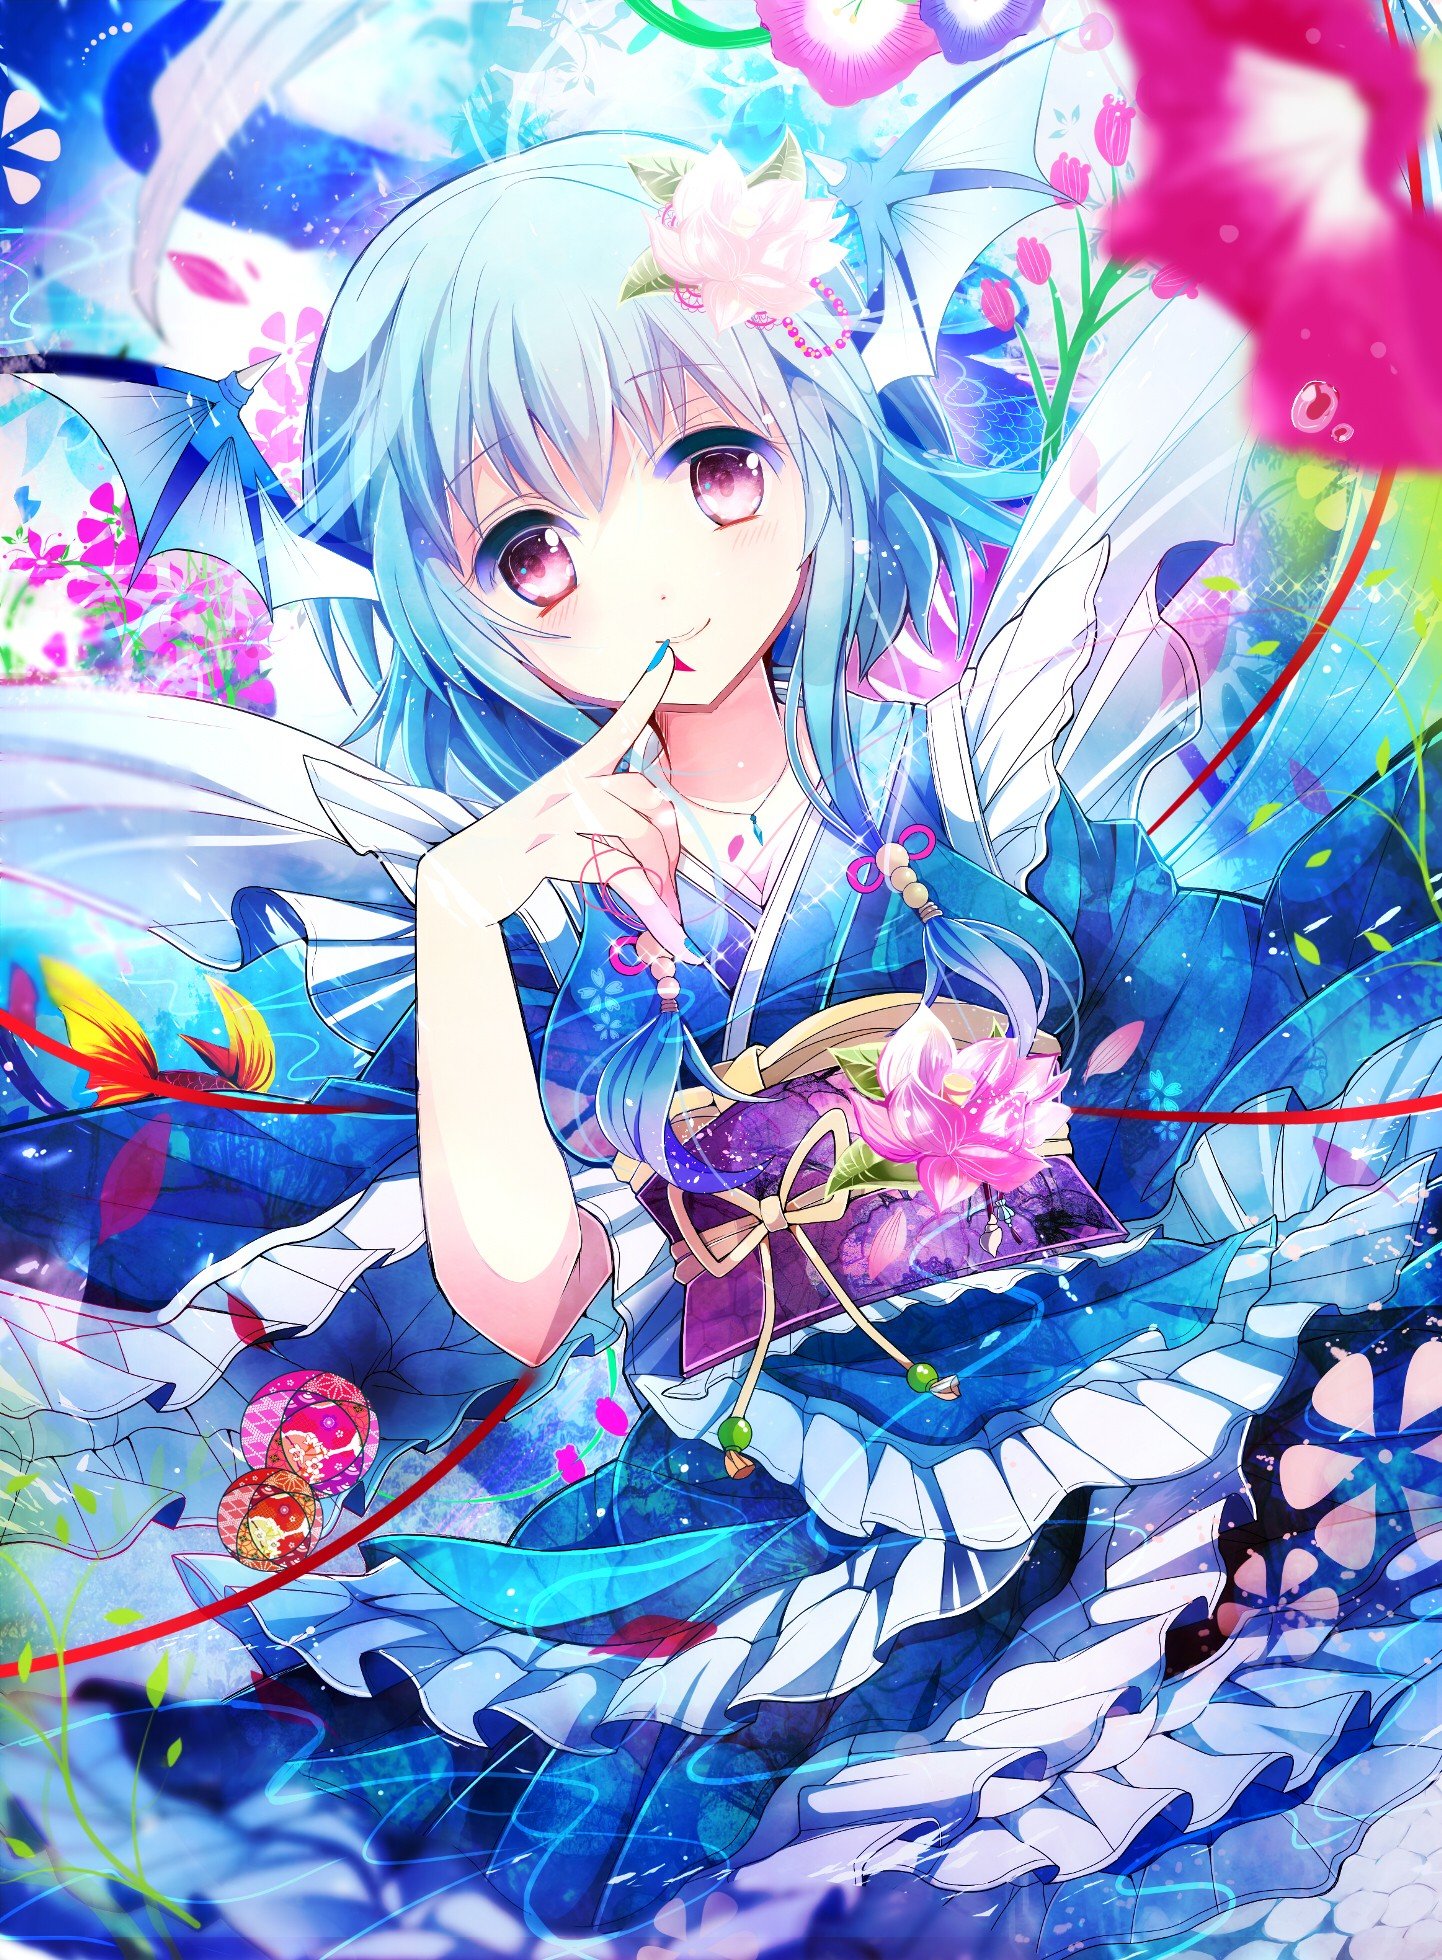 Wakasagihime, Touhou, Wings, Flowers, Flower in hair, Traditional clothing, Ribbon, Jewelry, Kimono, Sheet, Petals, Flower petals, Short hair, Anime girls, Anime Wallpaper